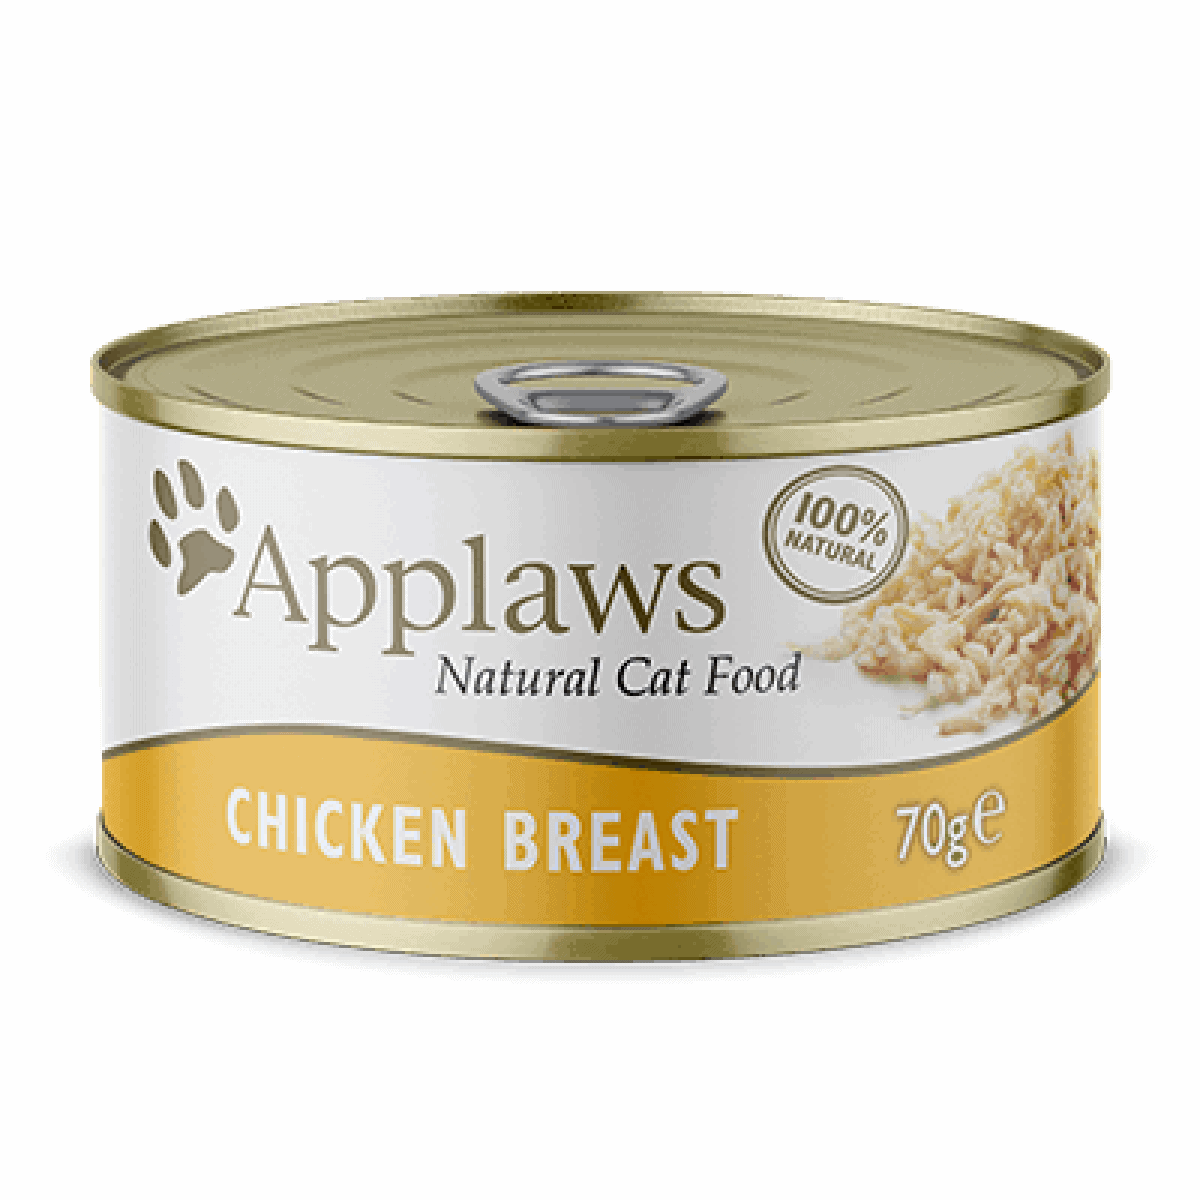 Applaws Chicken Breast 70g – Pawfect Supplies Ltd Product Image